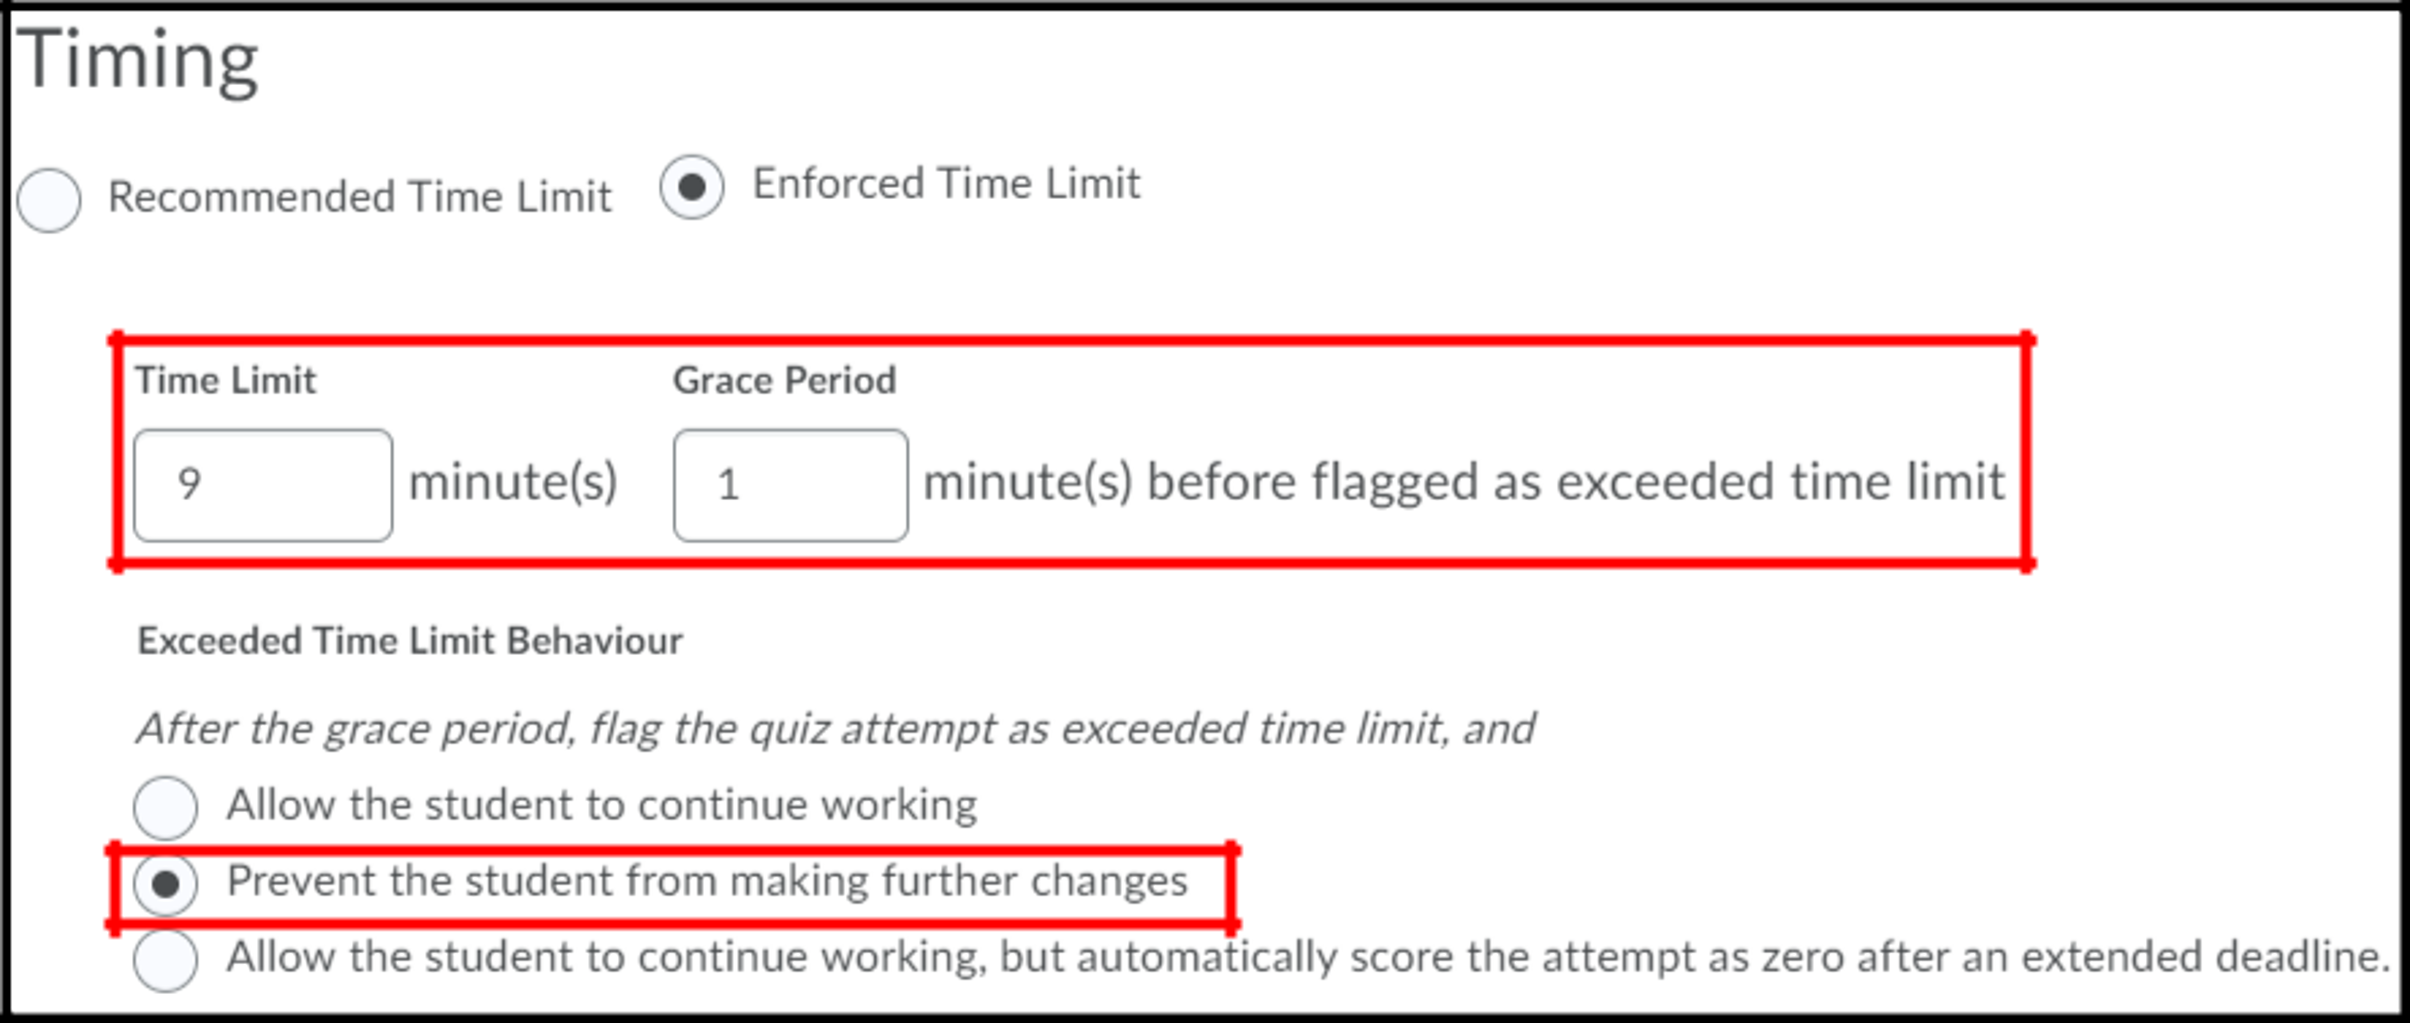 quiz restructions displaying Timing options on Brightspace, focusing enforced time limit as 9 minutes with 1 minute grace period. Additionally, the exceeded time limit behaviour is "Prevent the student from making further changes".